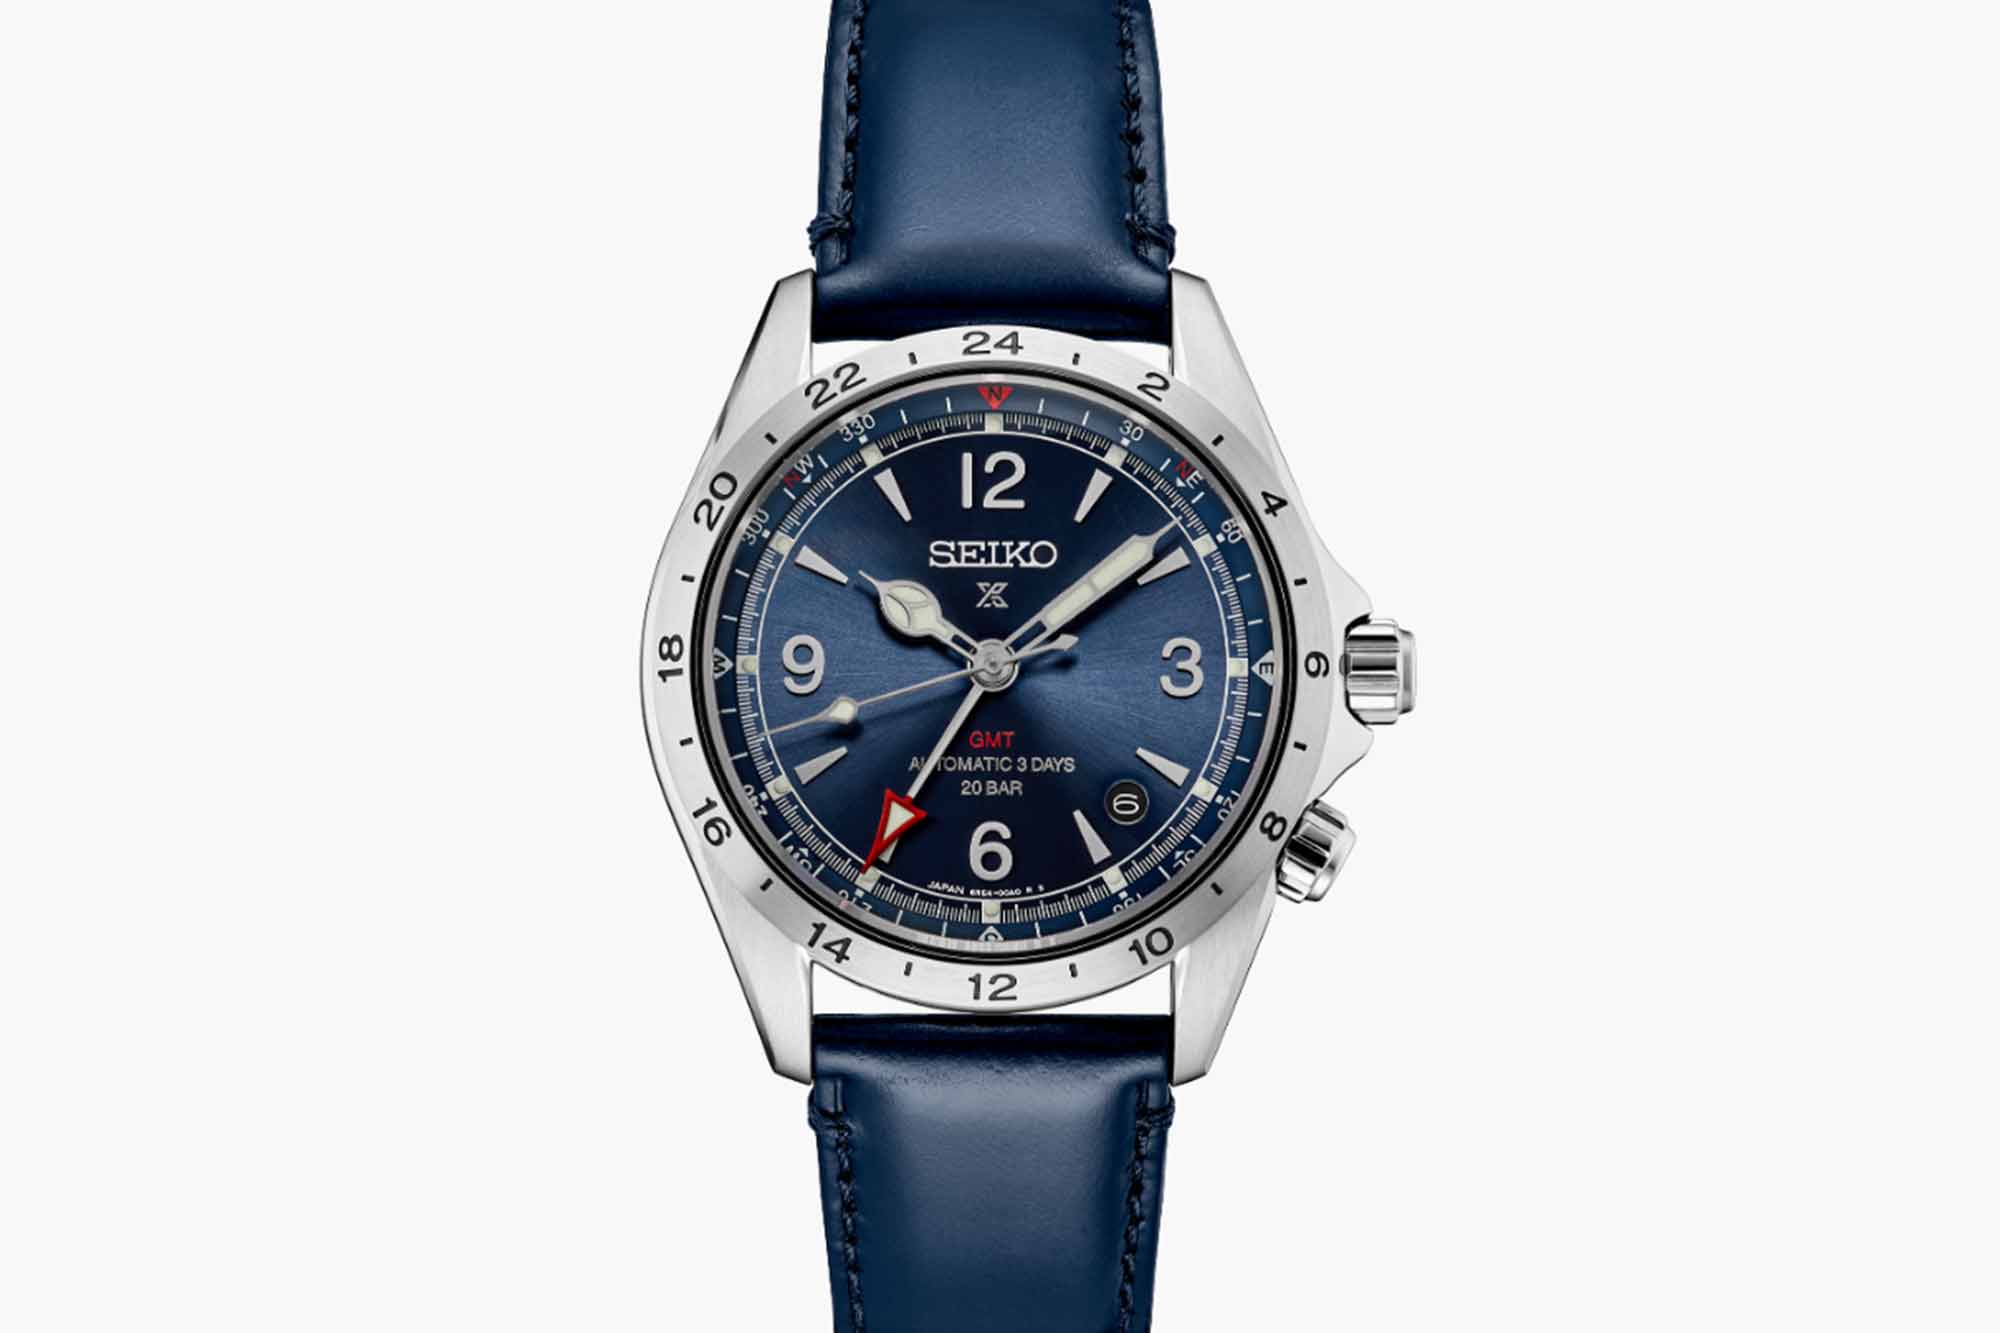 Seiko Brings the 6R54 GMT Caliber to the Alpinist Family - Worn & Wound